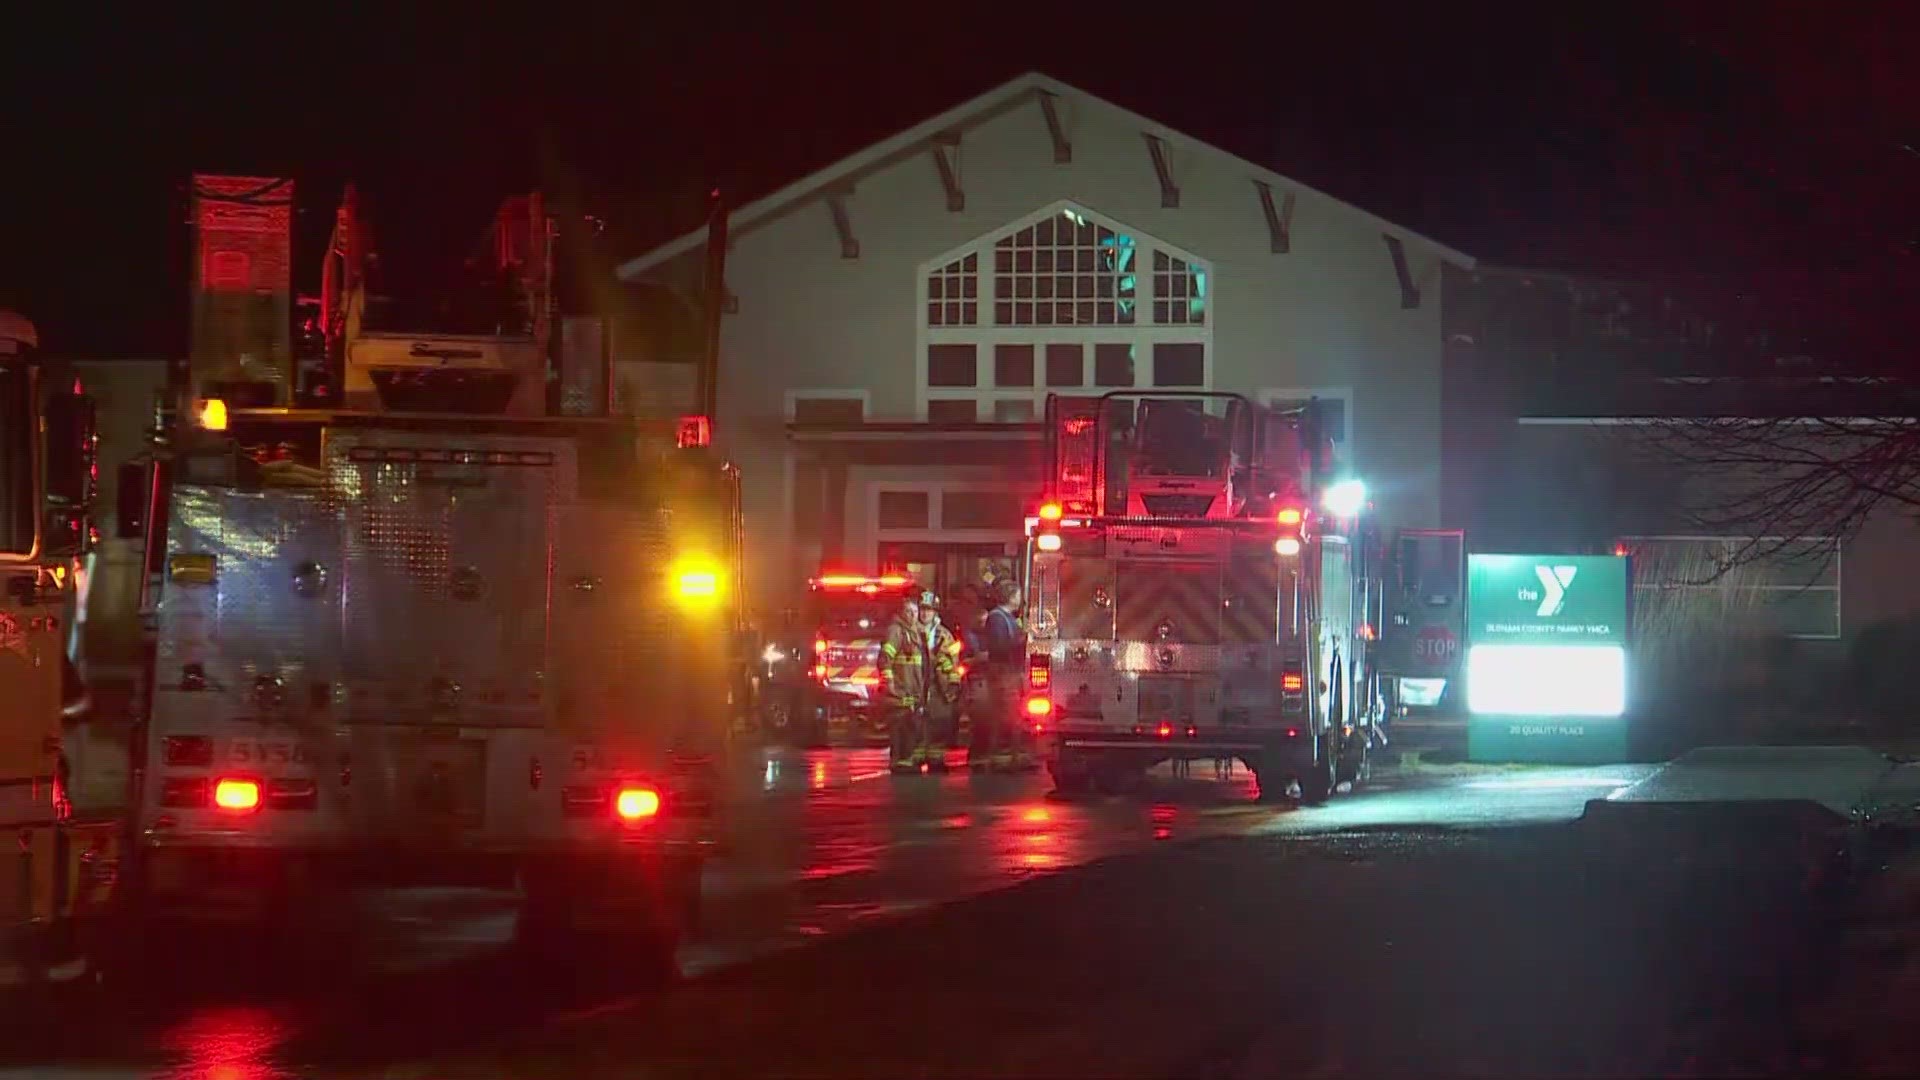 Officials say the fire started in a chicken coop outside the YMCA.